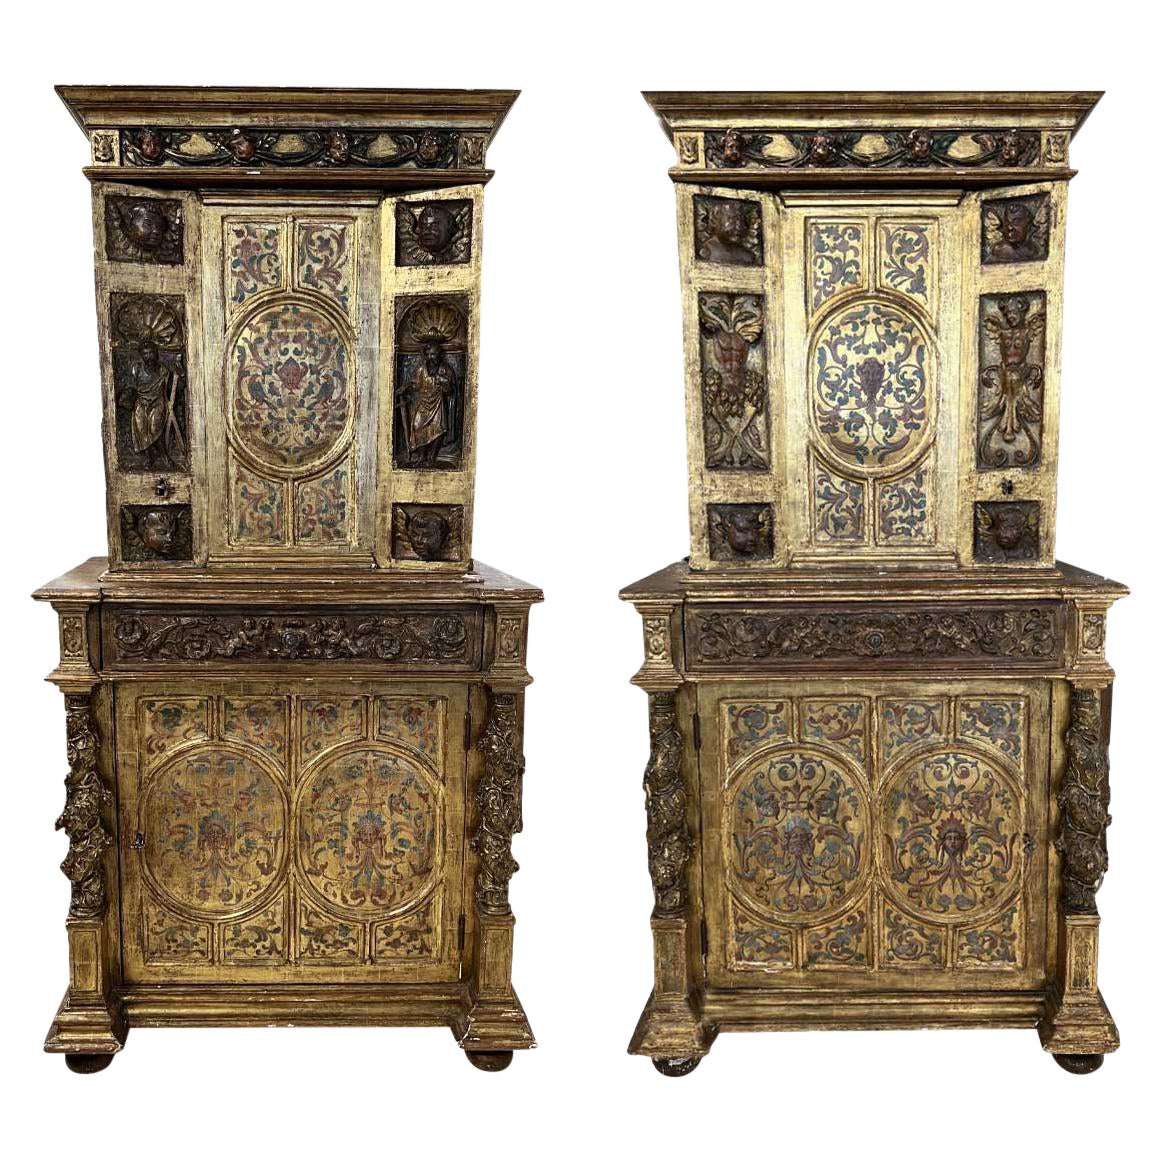  Pair of 17th Century Gilded Cabinets